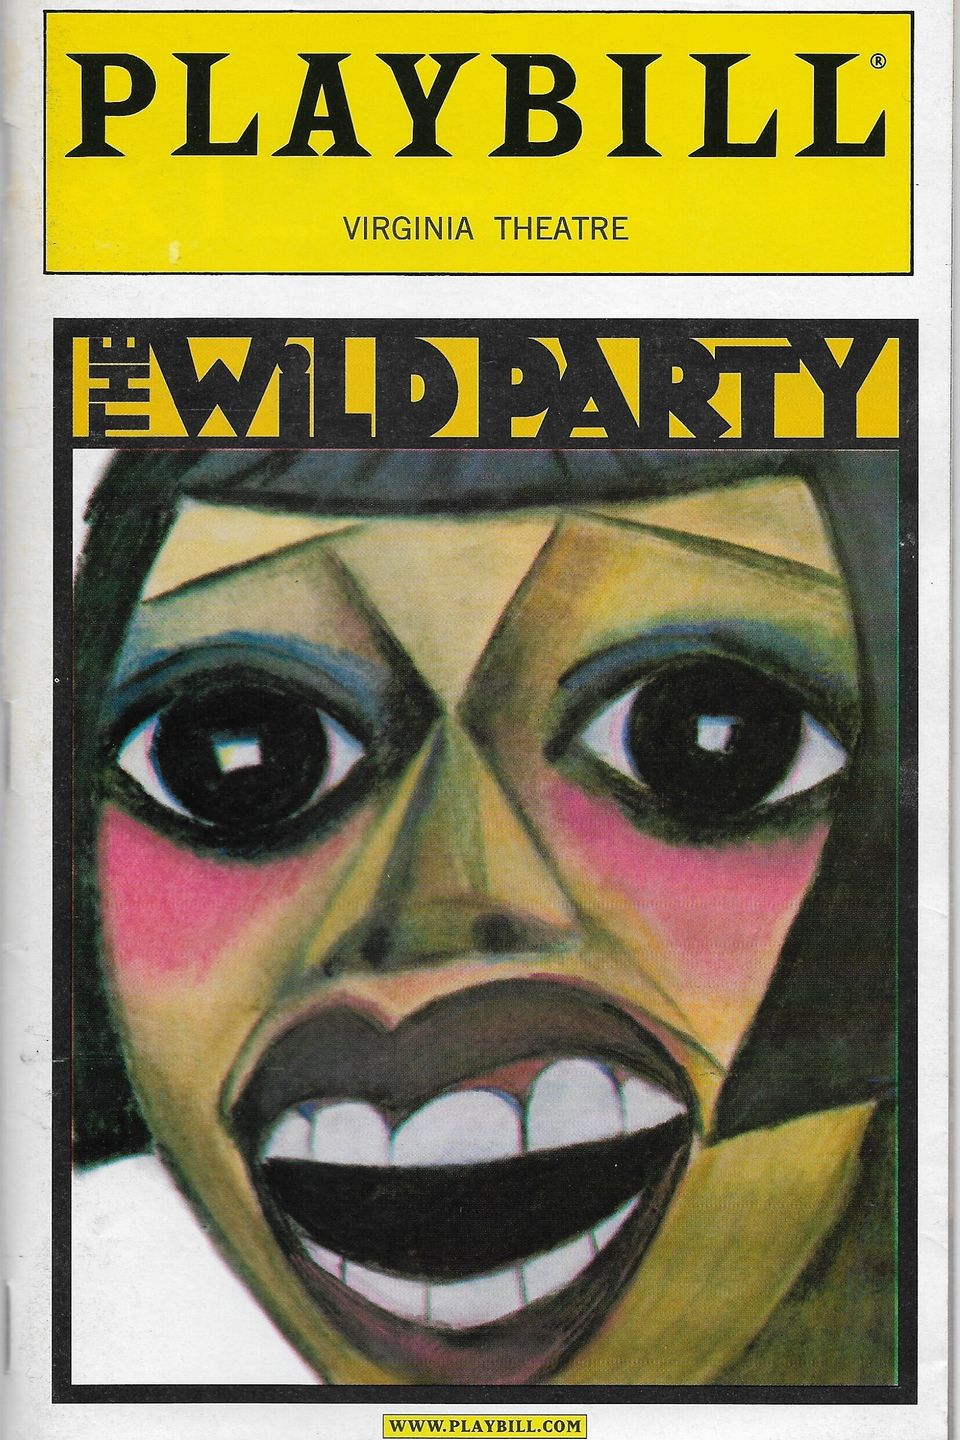 The wild party